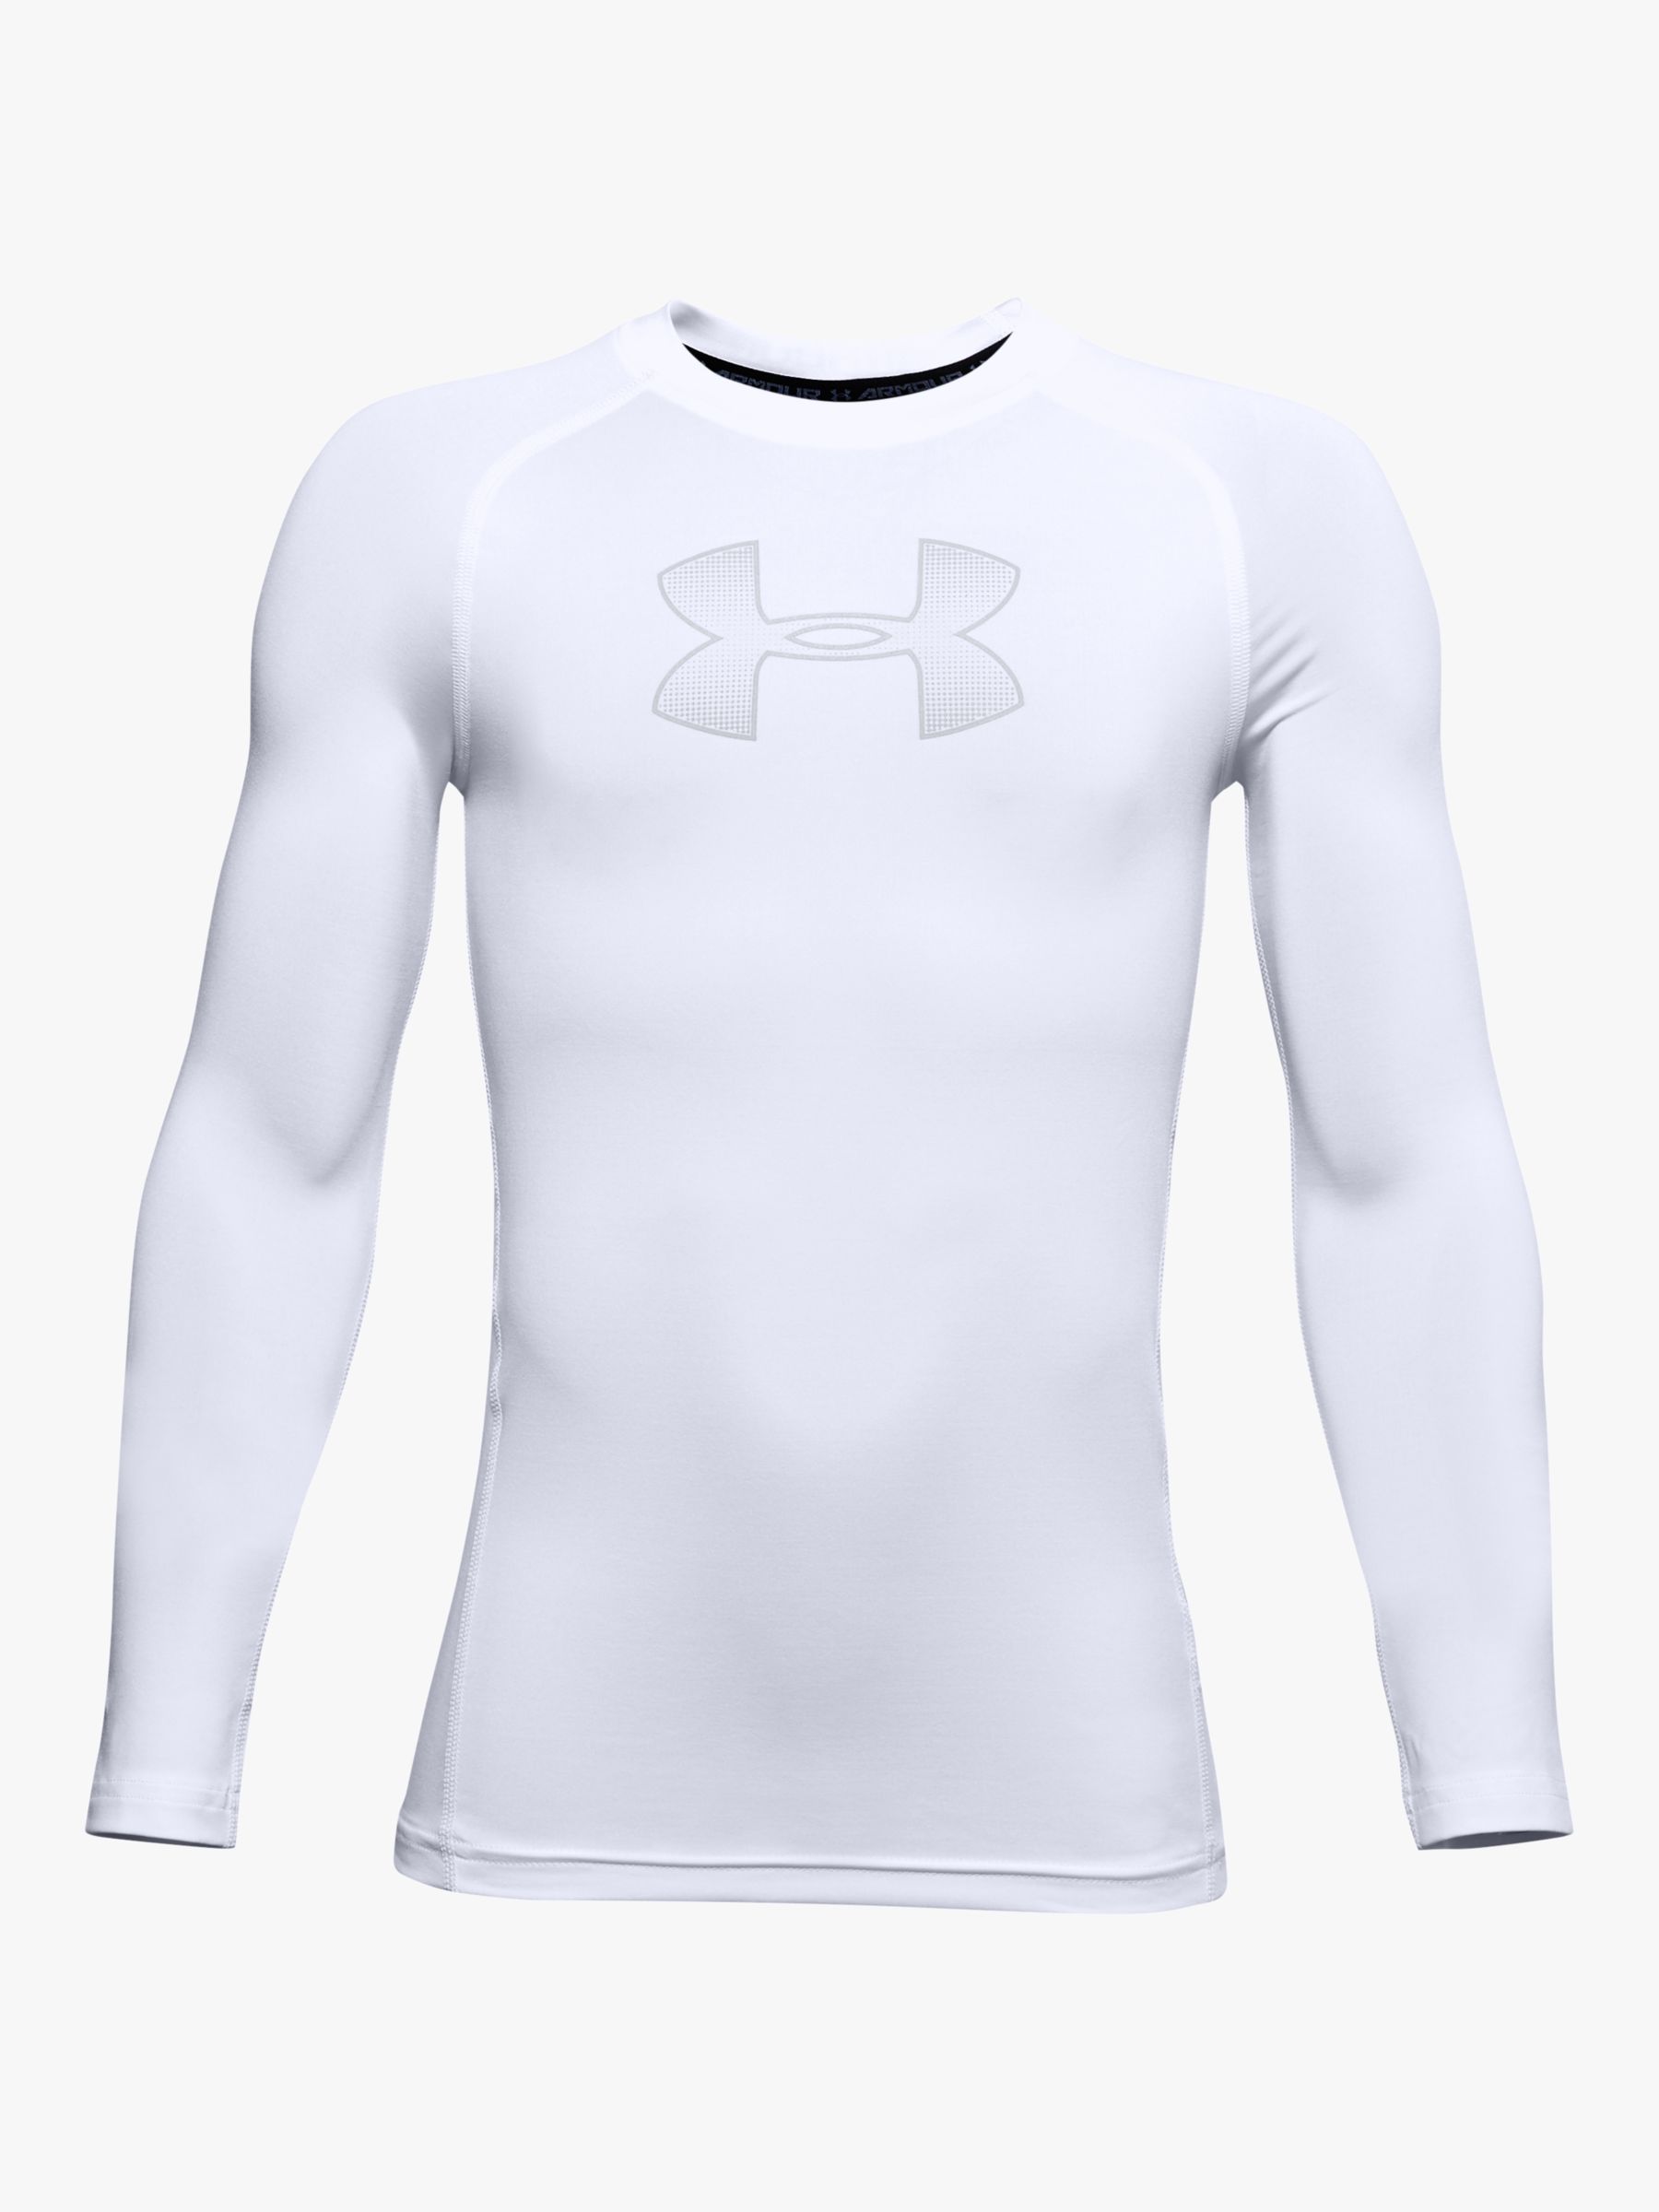 Image of Under Armour Boys HeatGear Long Sleeve Compression Top White